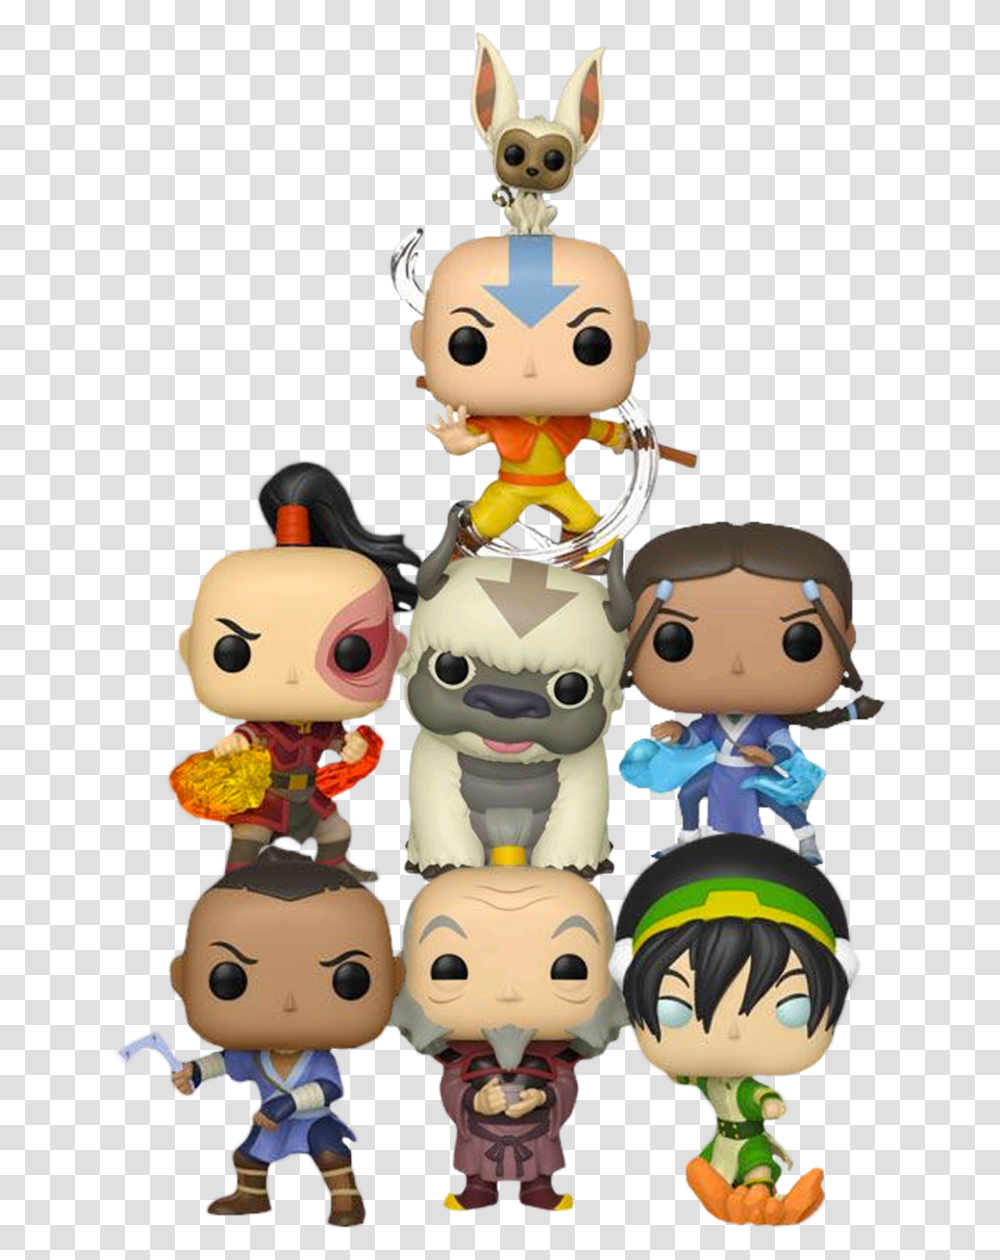 Avatar The Last Airbender Pops, Toy, Doll, Plush, Head Transparent Png